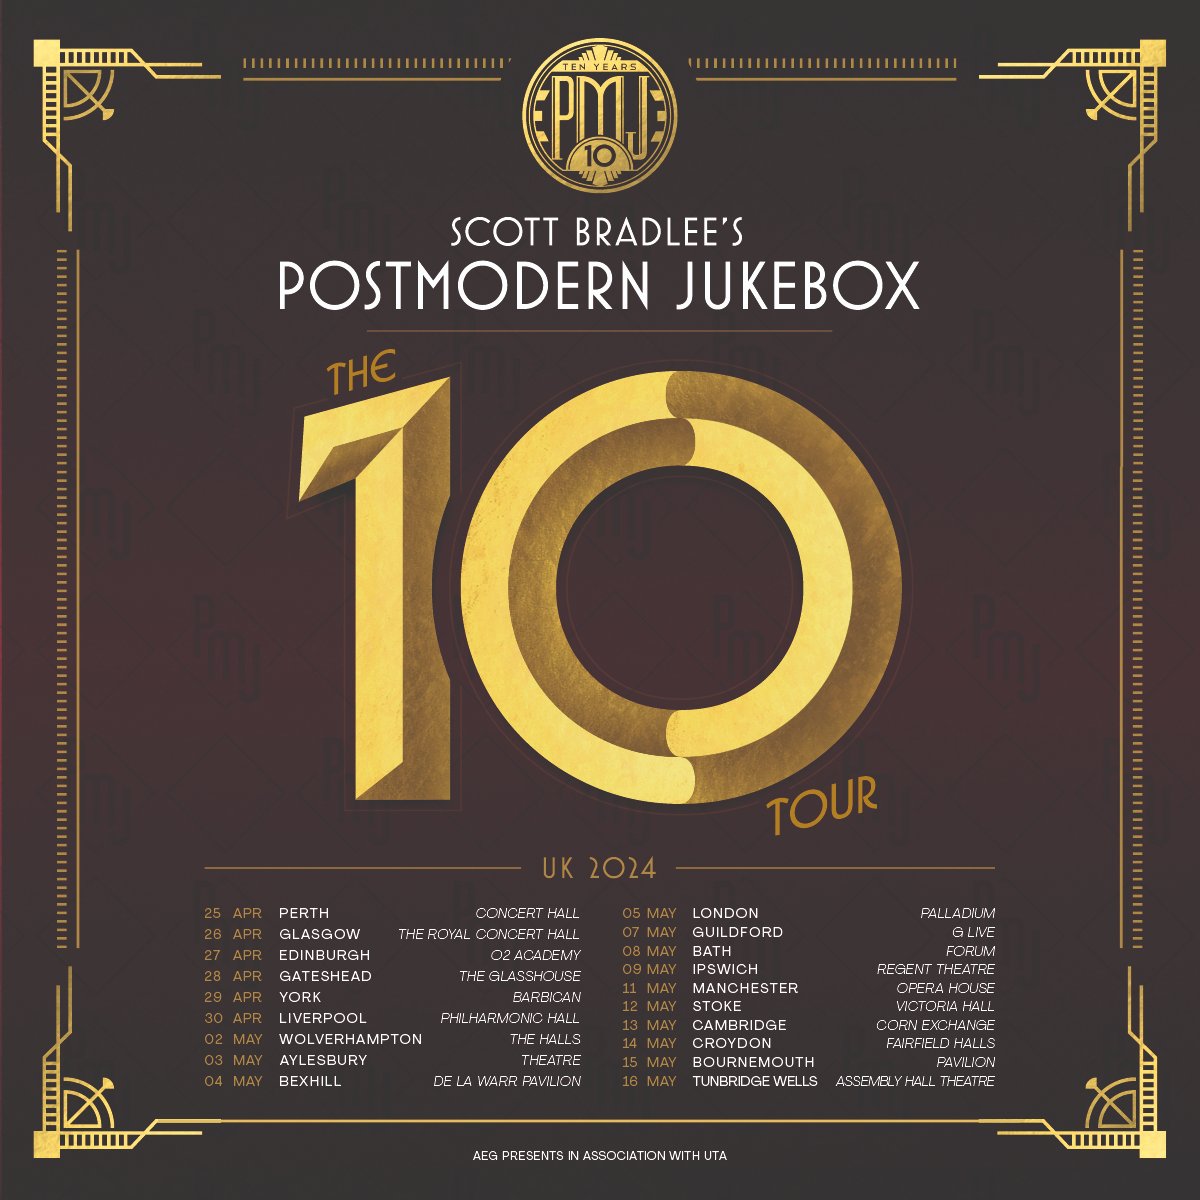 *ONLY ONE WEEK TO GO* Don't miss Scott Bradlee's Postmodern Jukebox live at the Assembly Hall Theatre on May 16th at 7:30pm!! Book your tickets now at: assemblyhalltheatre.co.uk/whats-on/scott…